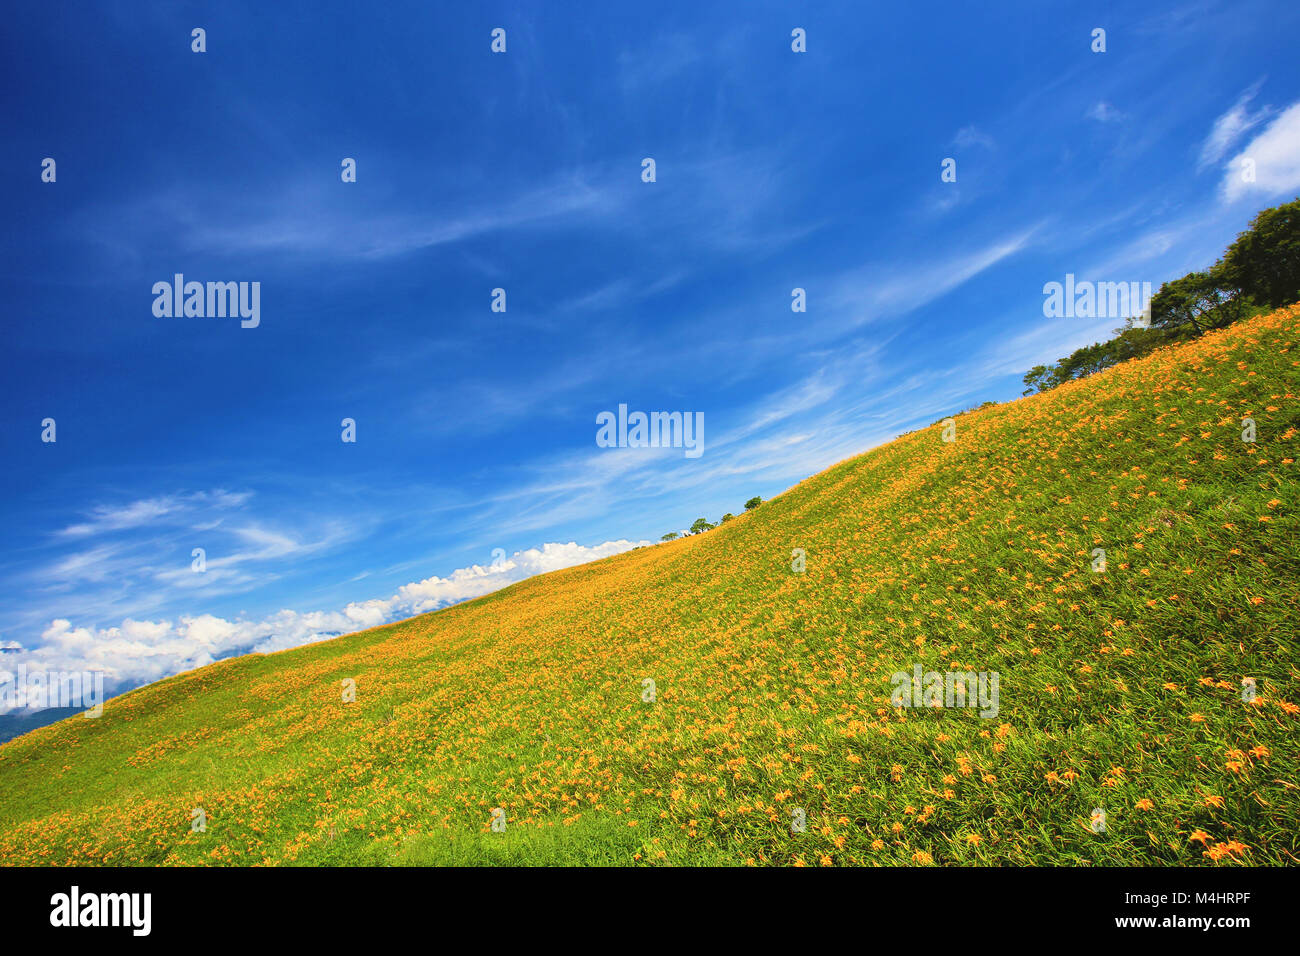 Daylily flowers and buds blooming on the hill in a sunny day,beautiful scenery of orange hemerocallis Stock Photo